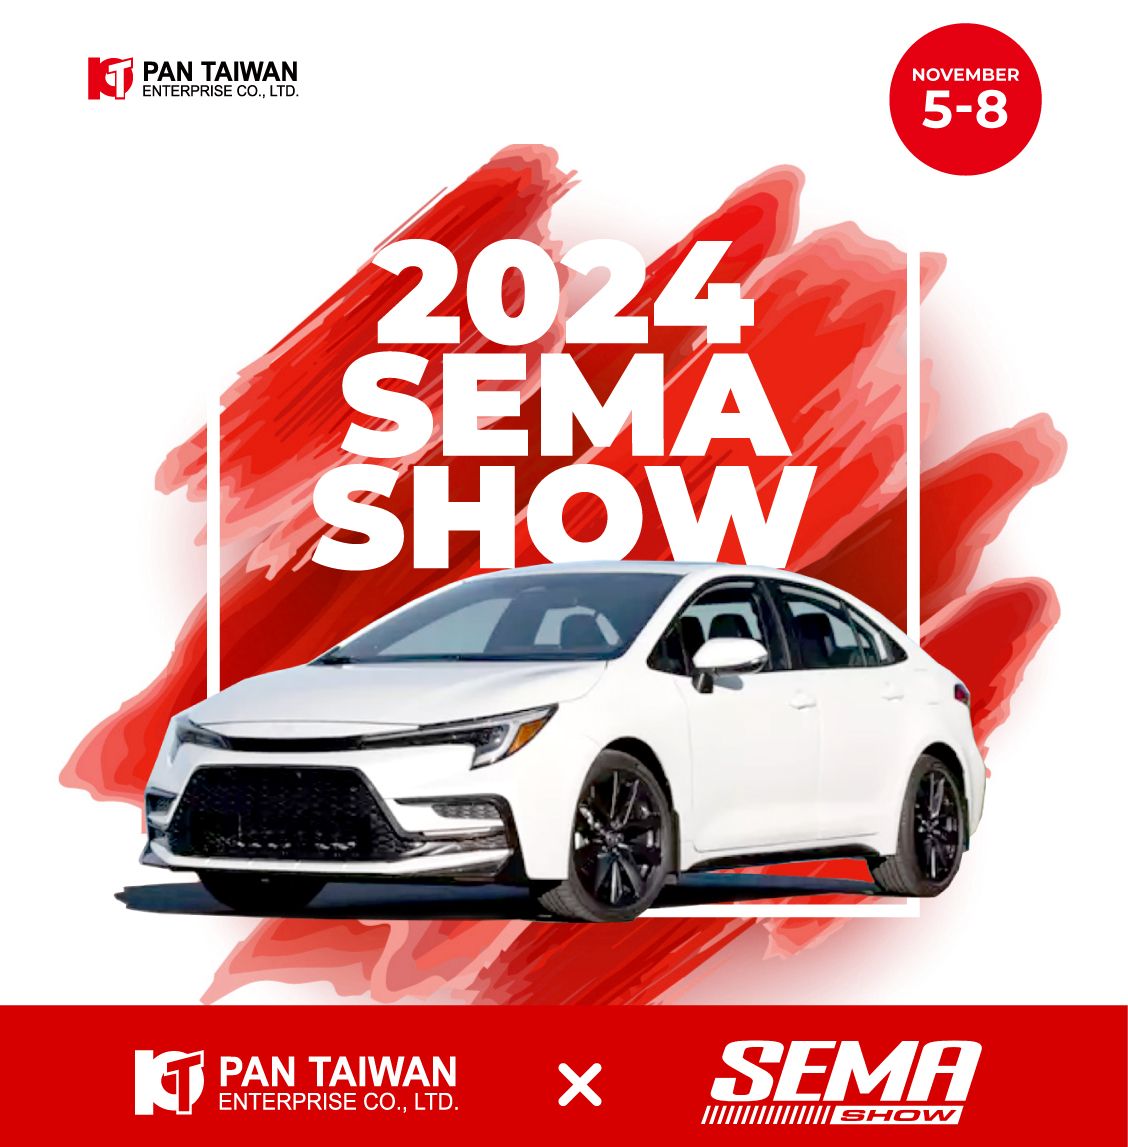 Pan Taiwan, a leading auto parts manufacturer based in Taiwan, is excited to announce that we will be showcasing our innovative products at the SEMA Show in Las Vegas from November 5-8, 2024.